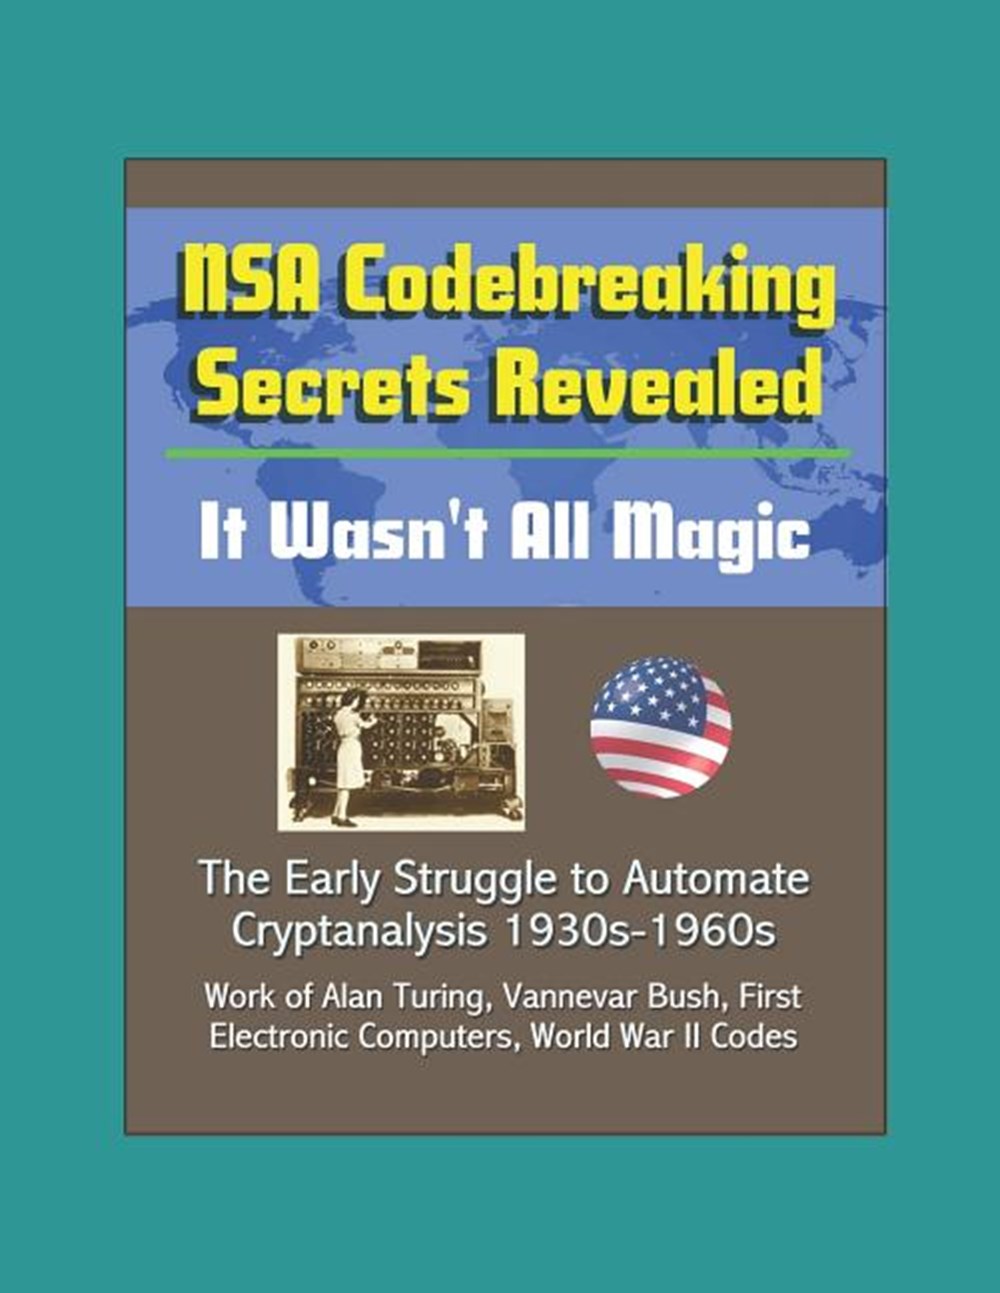 NSA Codebreaking Secrets Revealed: It Wasn't All Magic - The Early Struggle to Automate Cryptanalysi